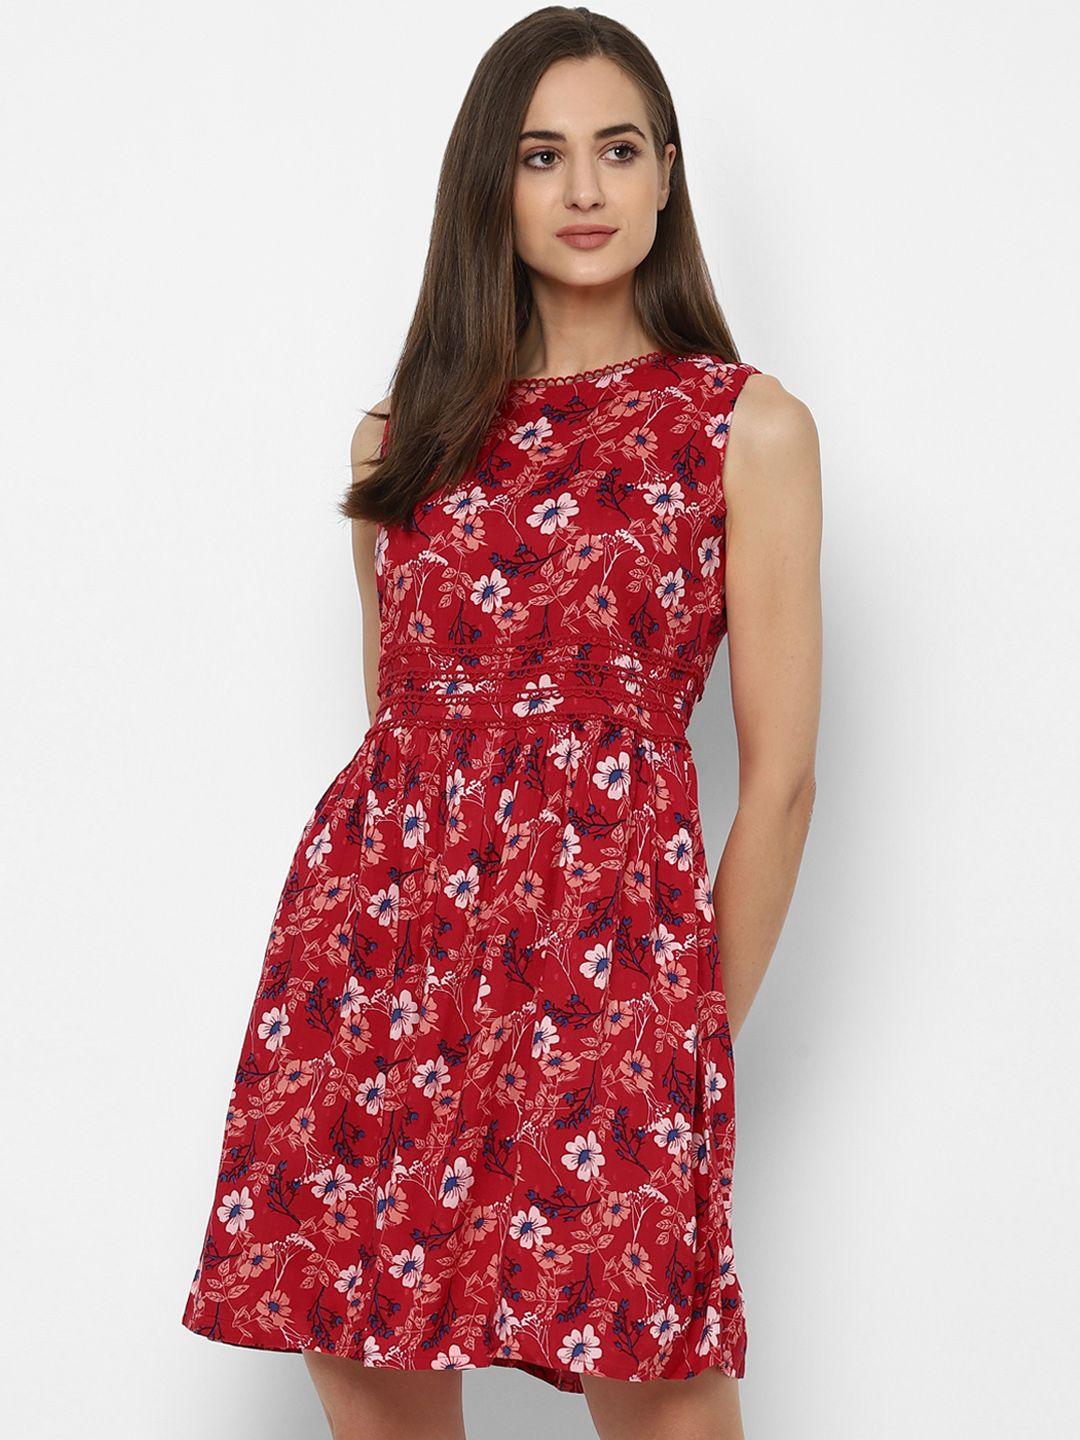 allen solly woman red floral dress